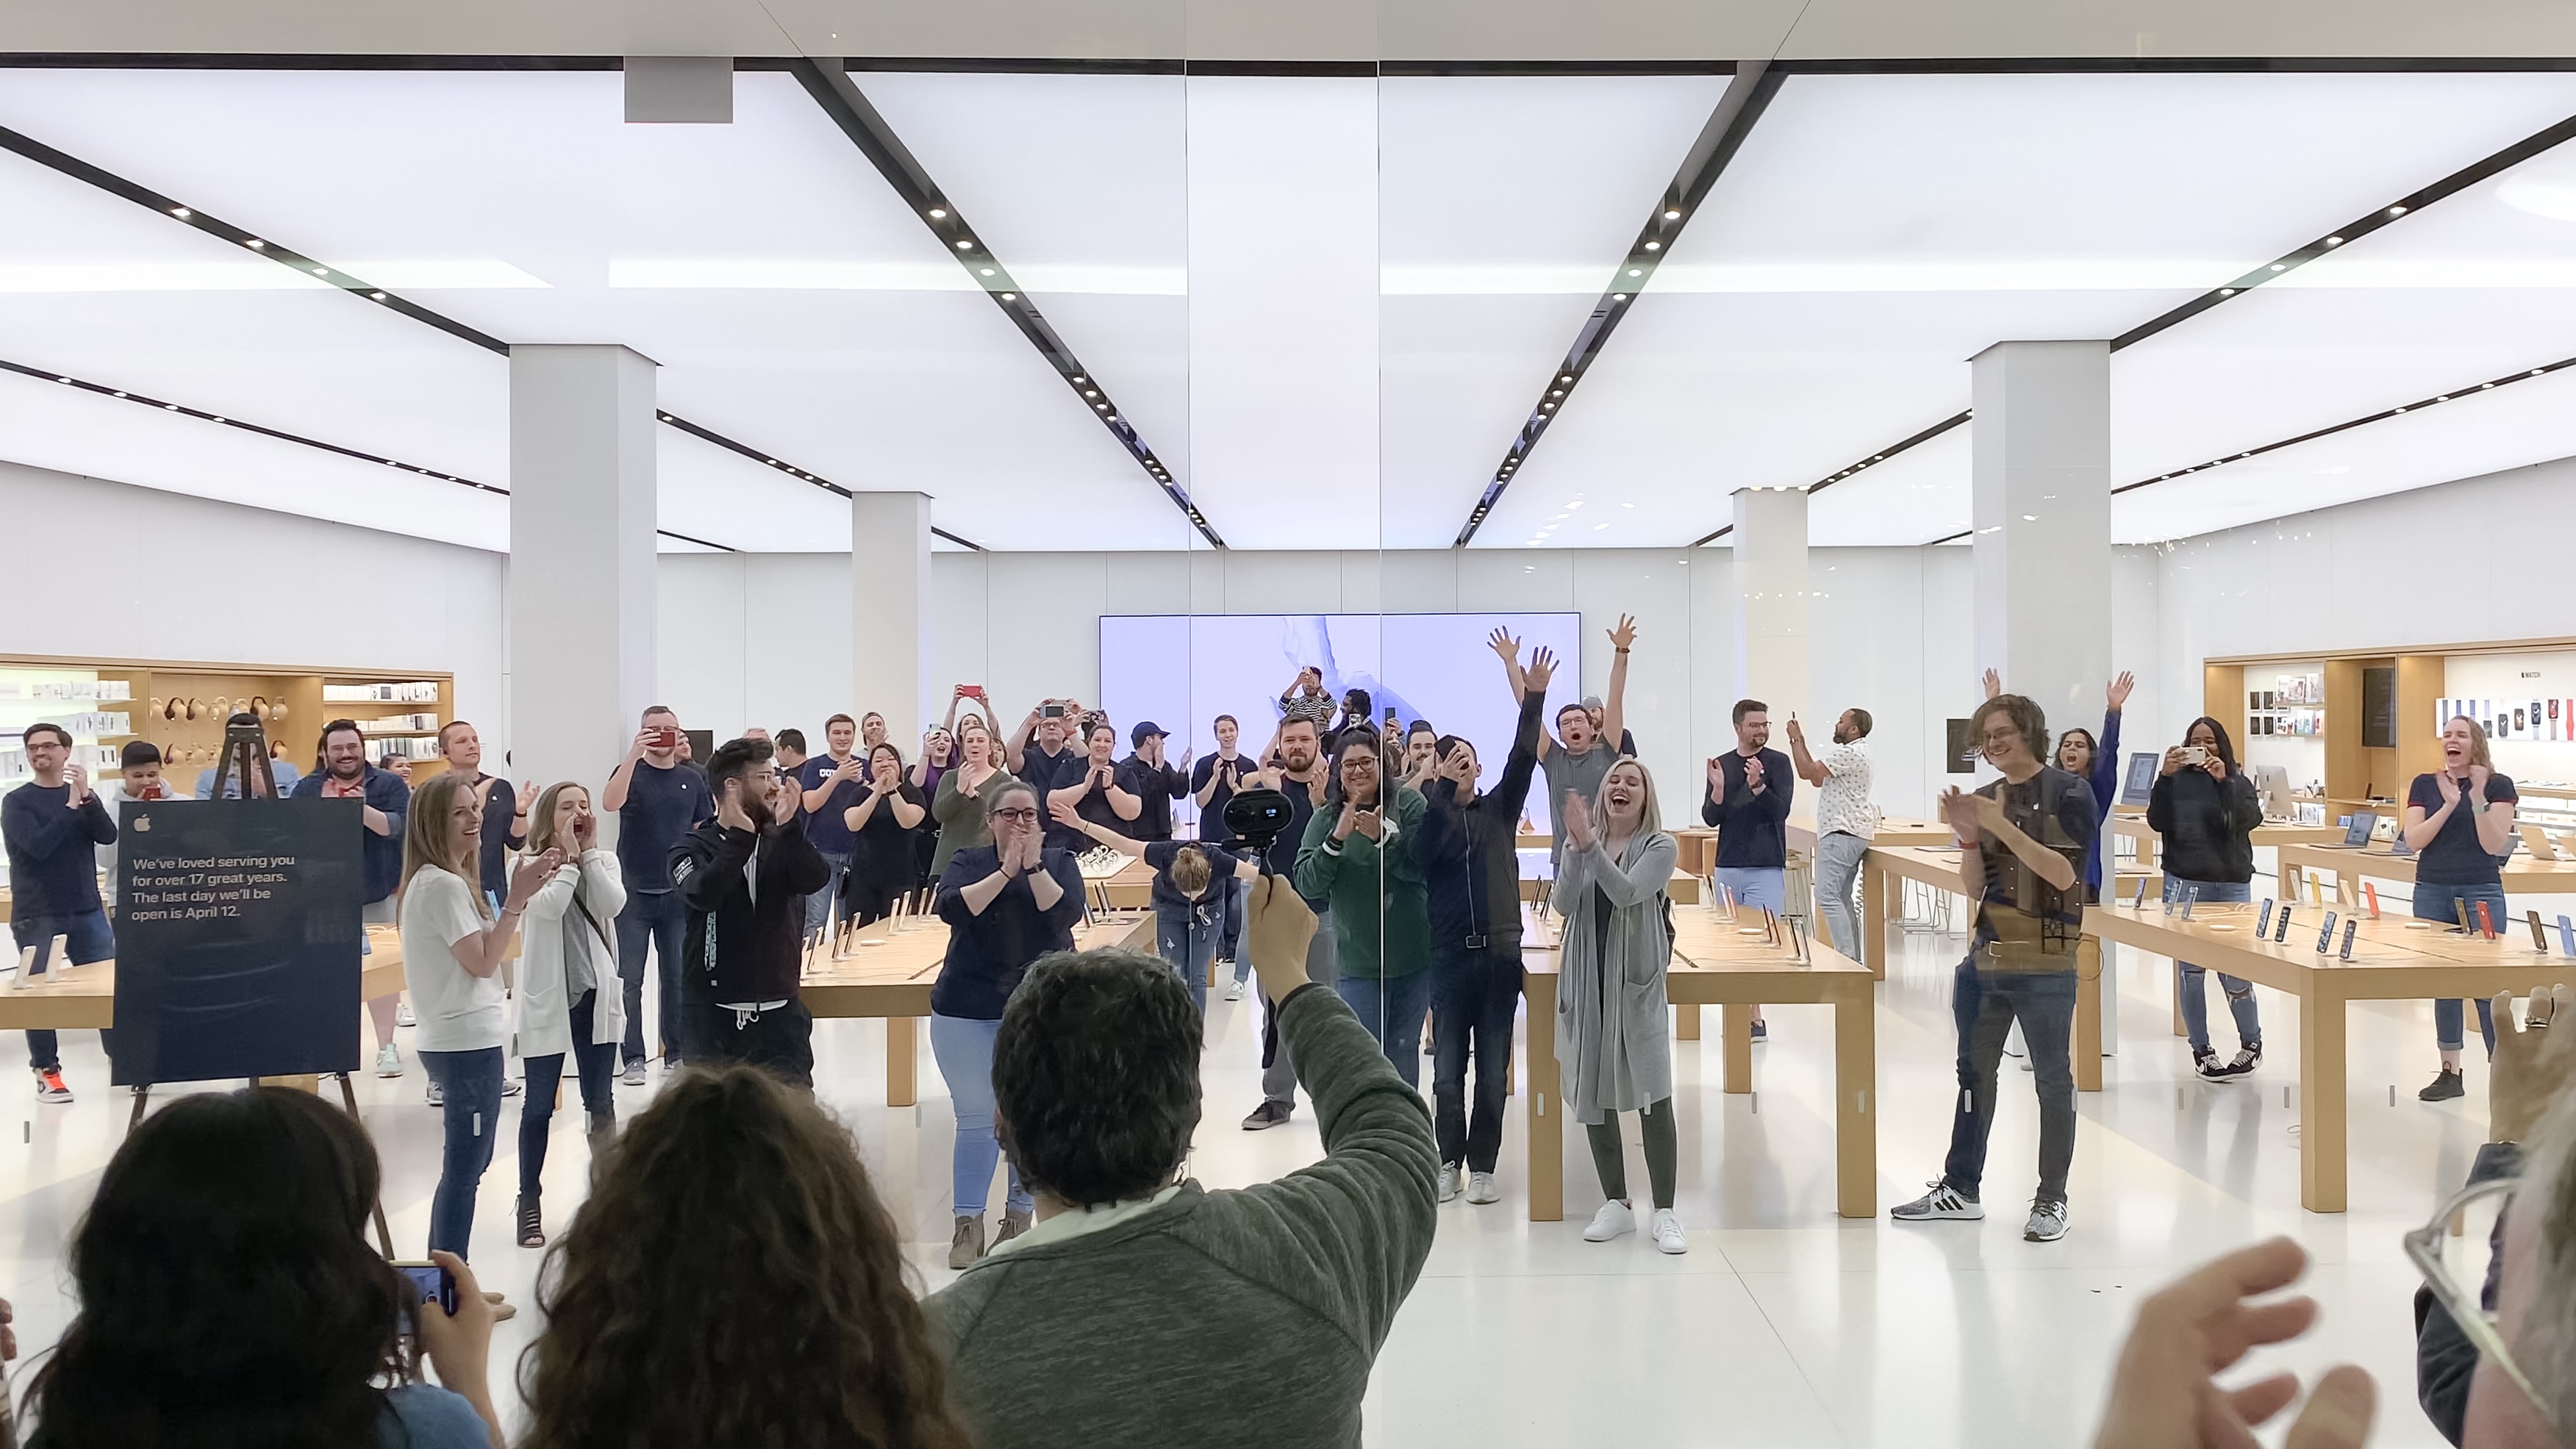 Apple re-closes Texas stores, including two in San Antonio